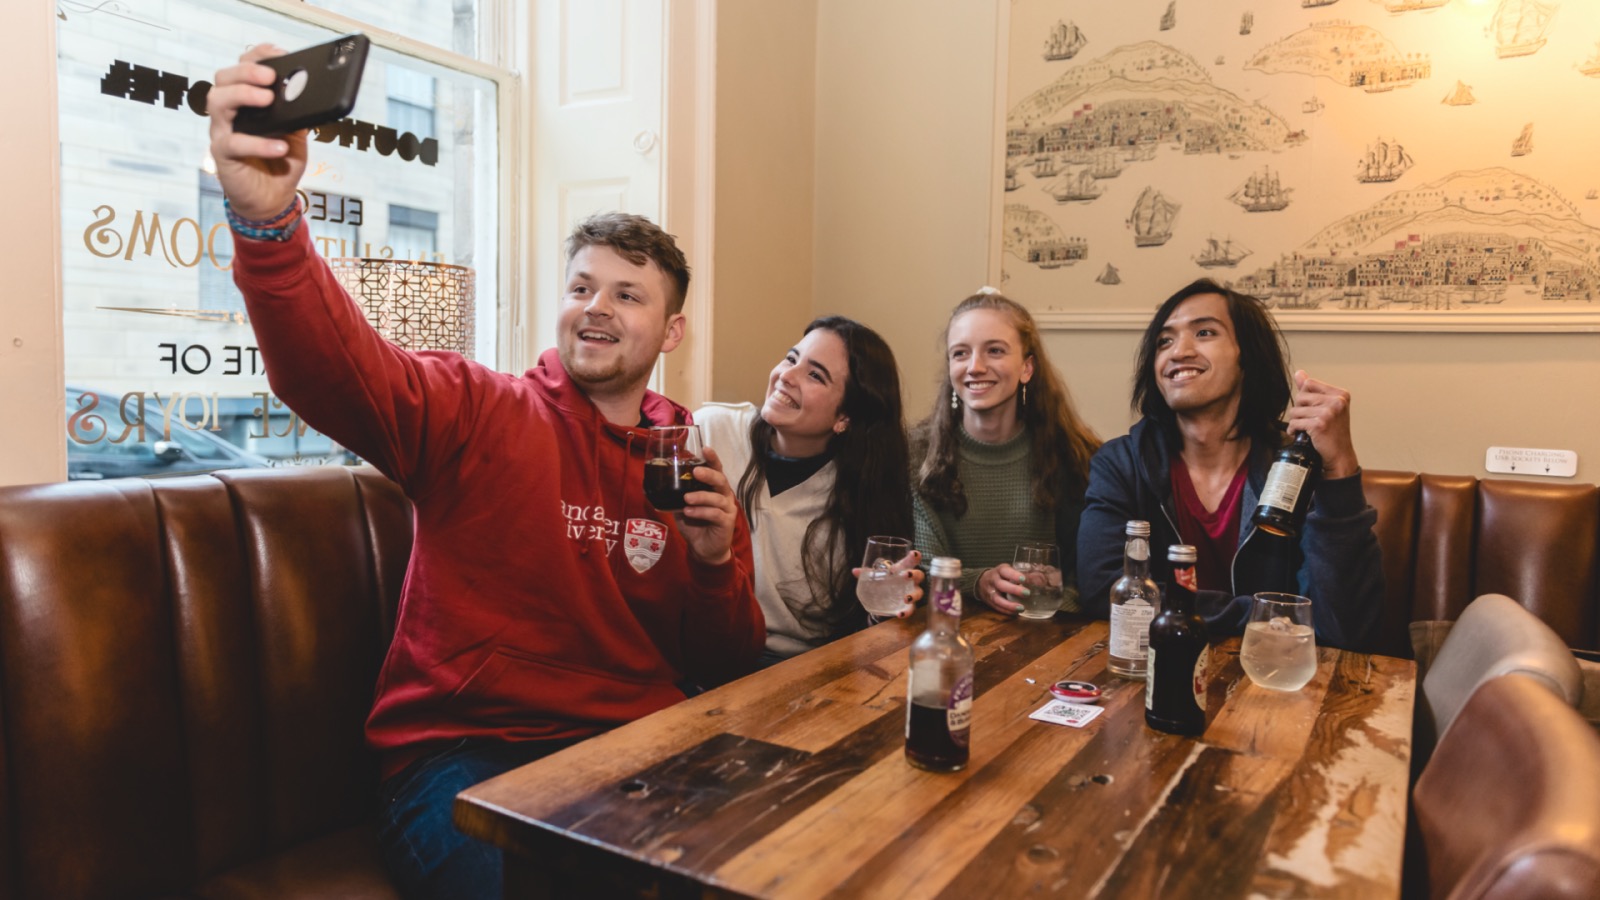 Four students taking a selfie in a local pub.